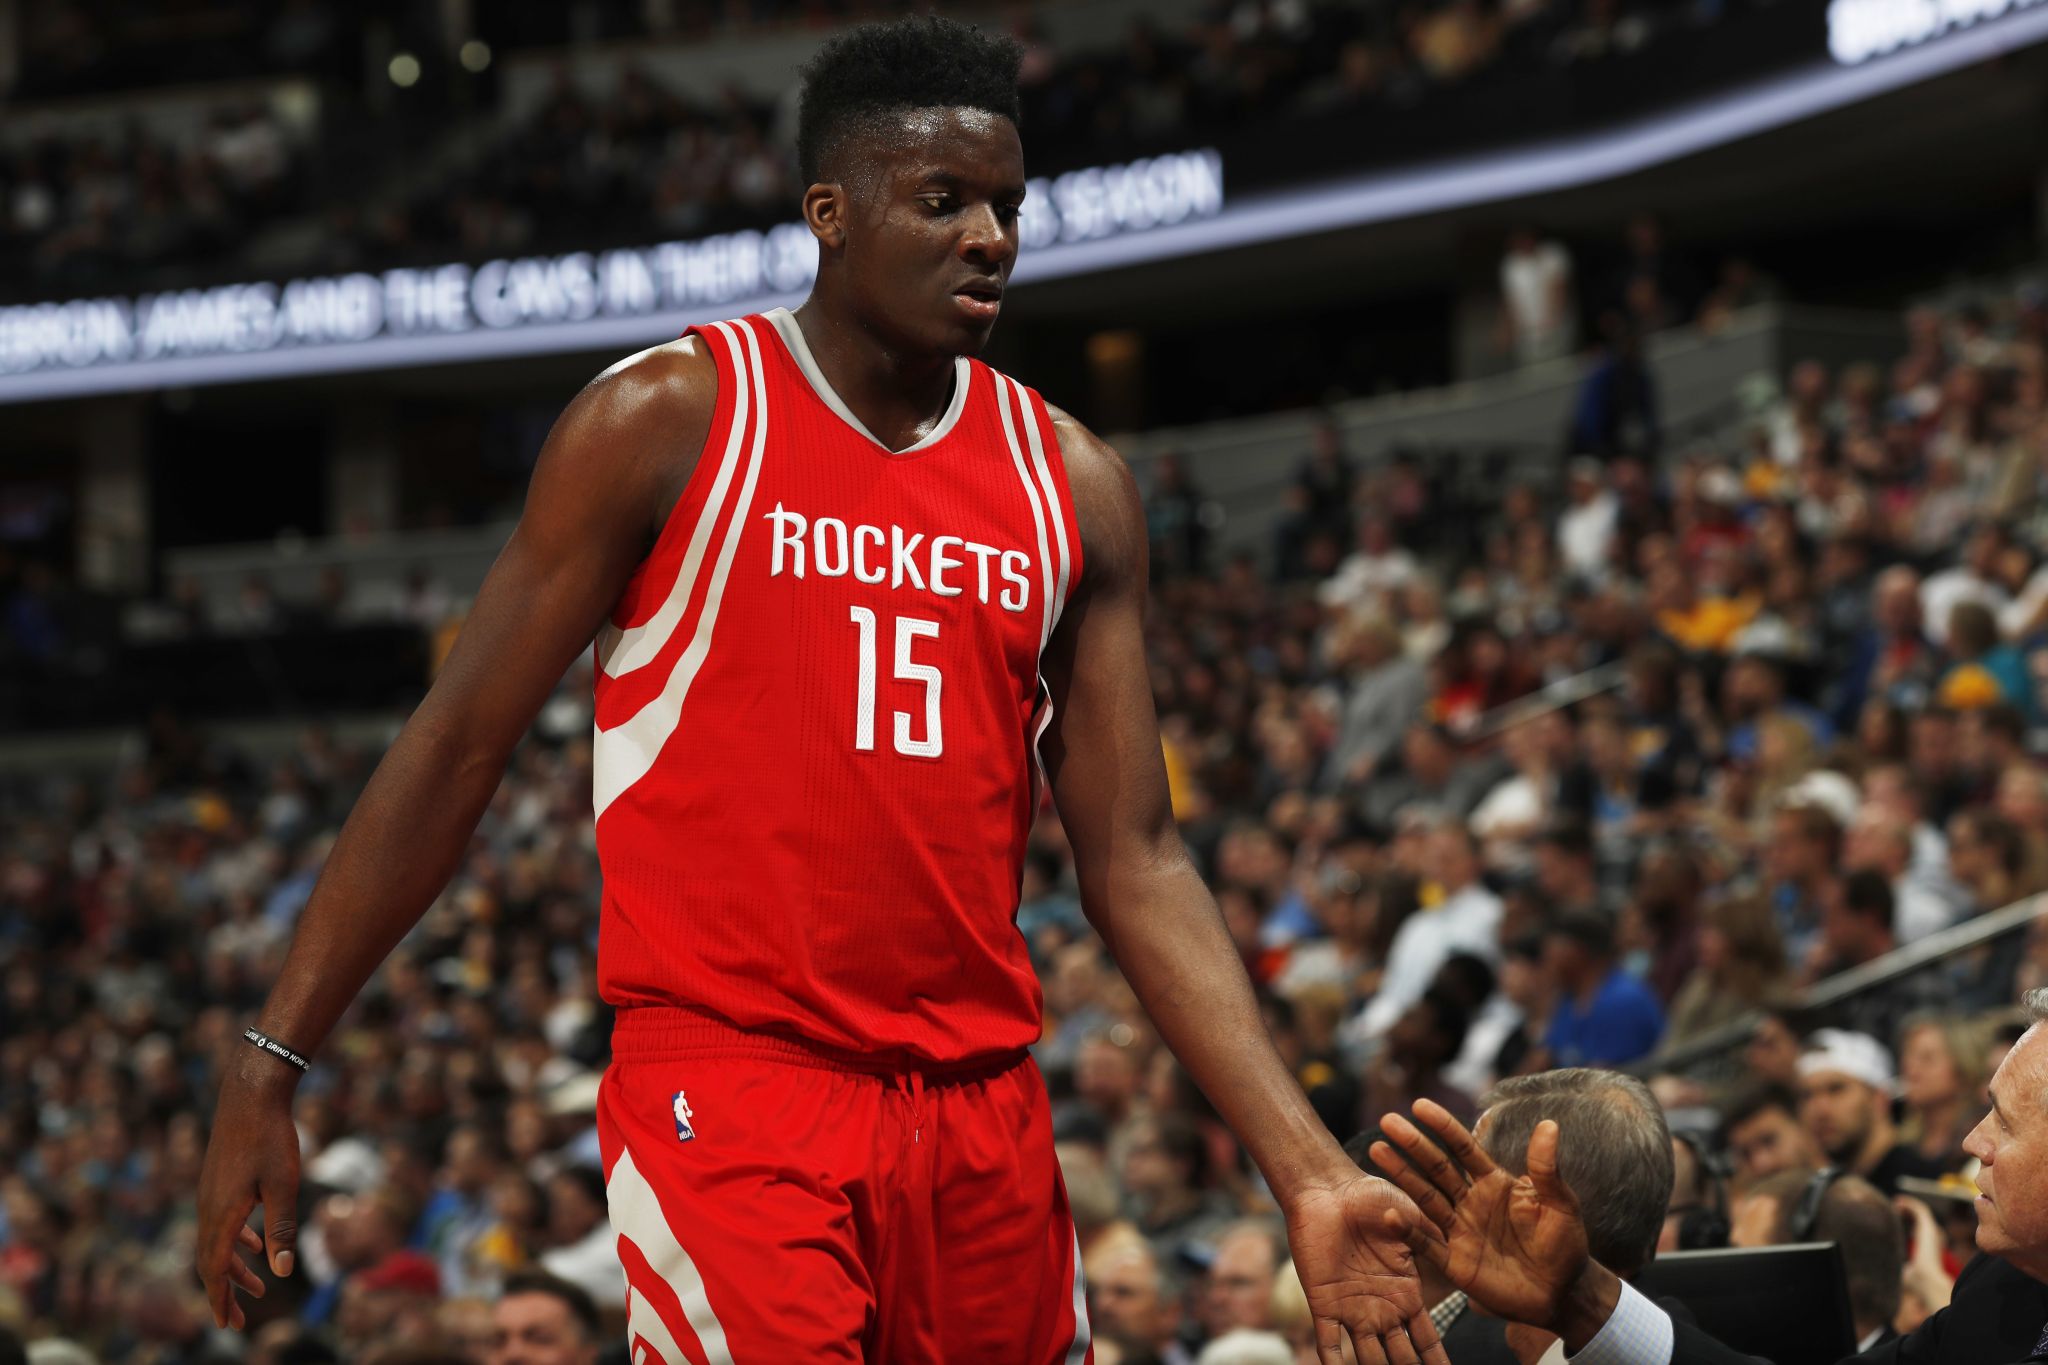 Rockets roll with Clint Capela as starter vs. Trail Blazers - Houston Chronicle2048 x 1365